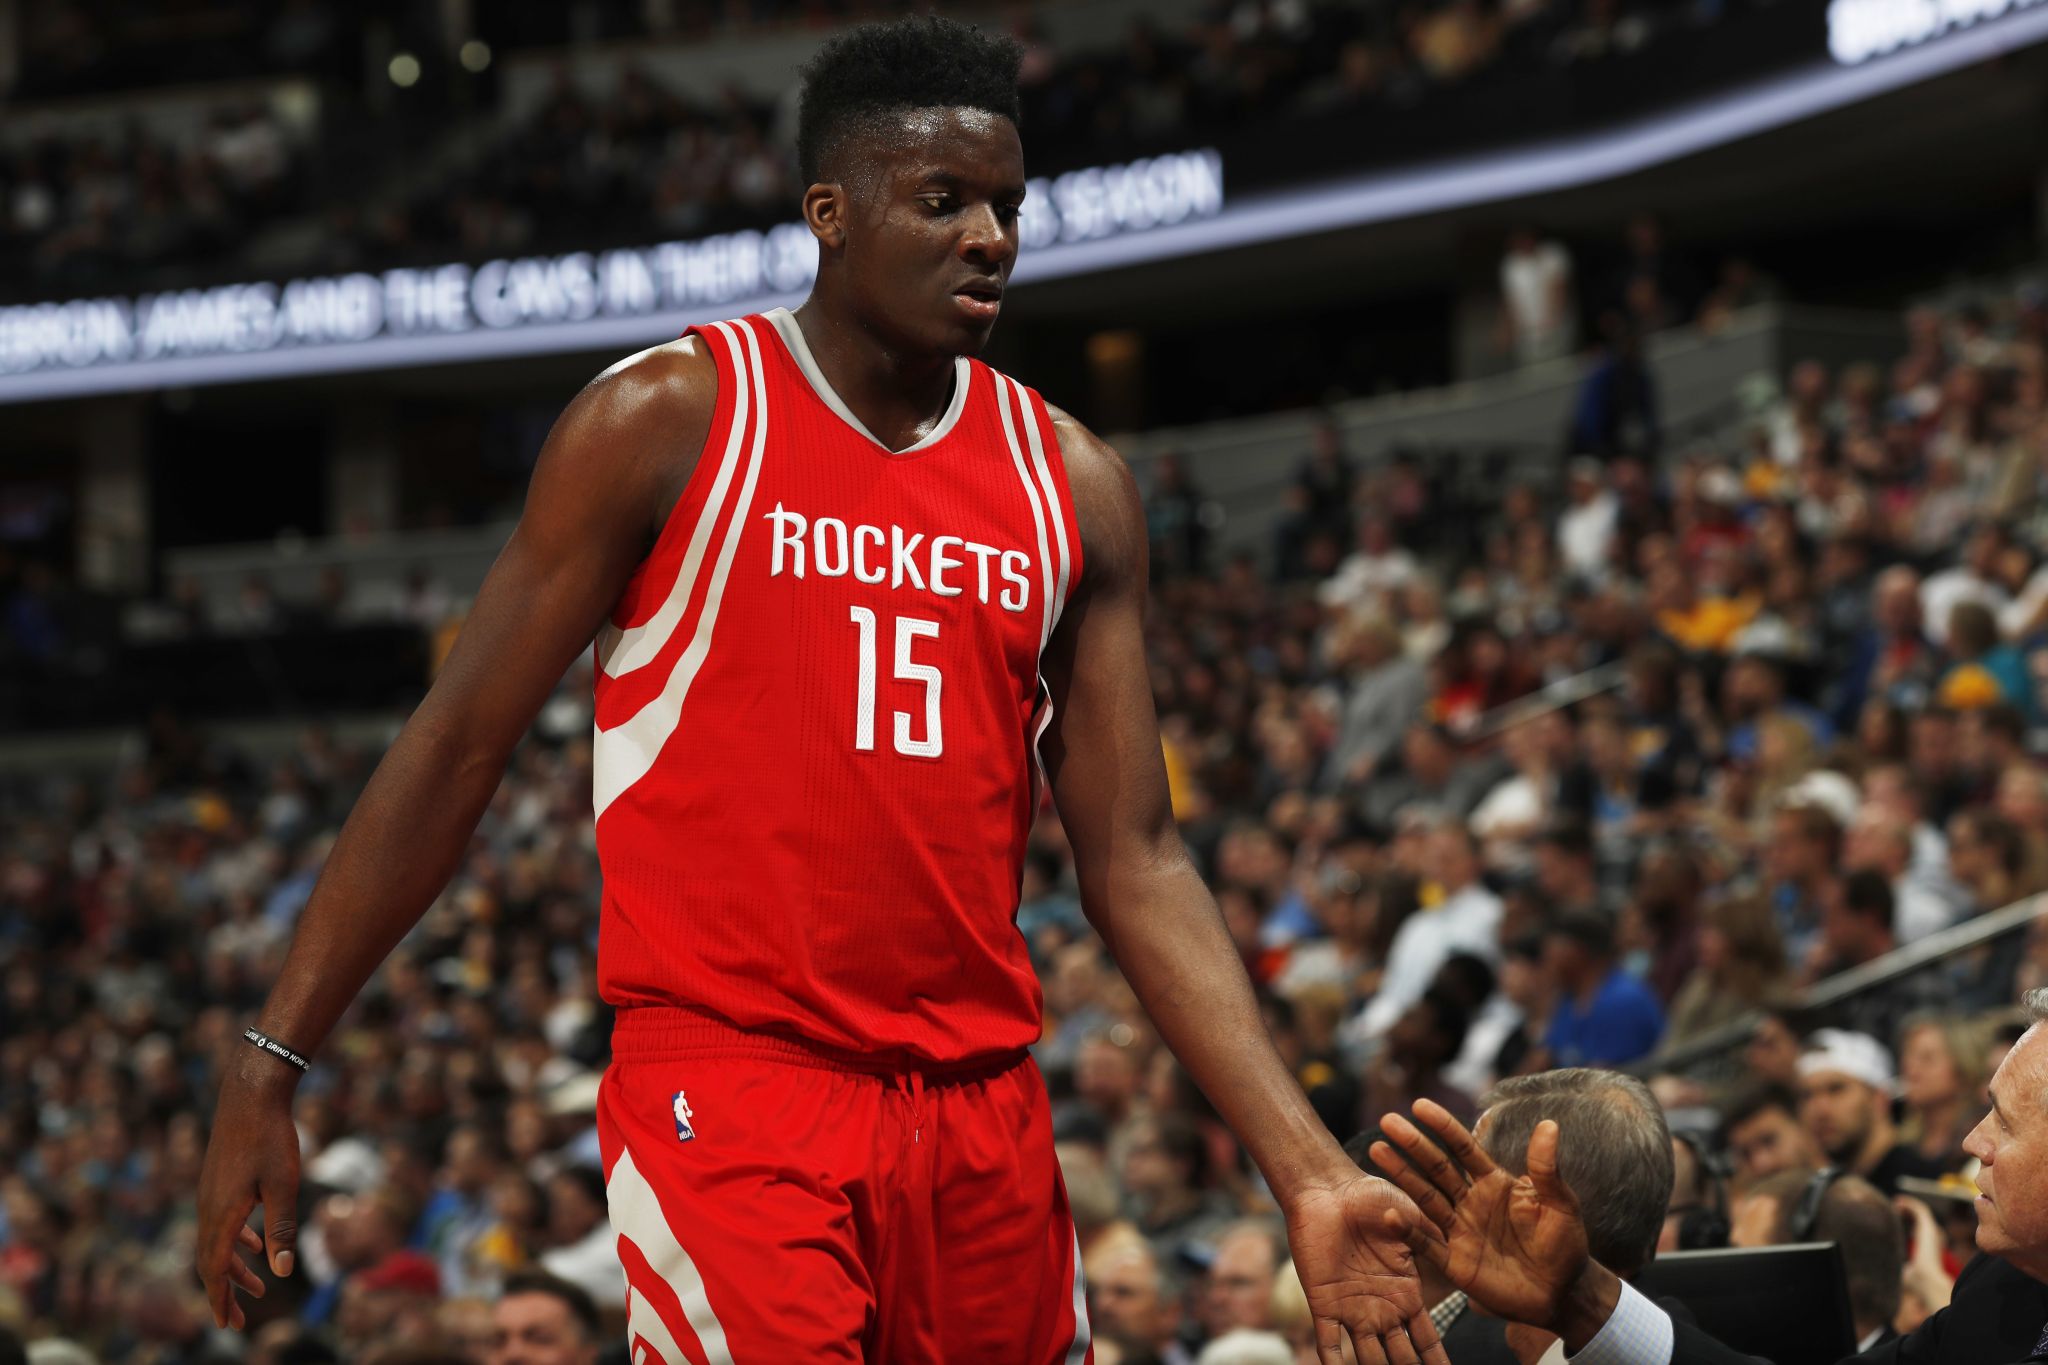 Rockets roll with Clint Capela as starter vs. Trail Blazers - Houston Chronicle2048 x 1365